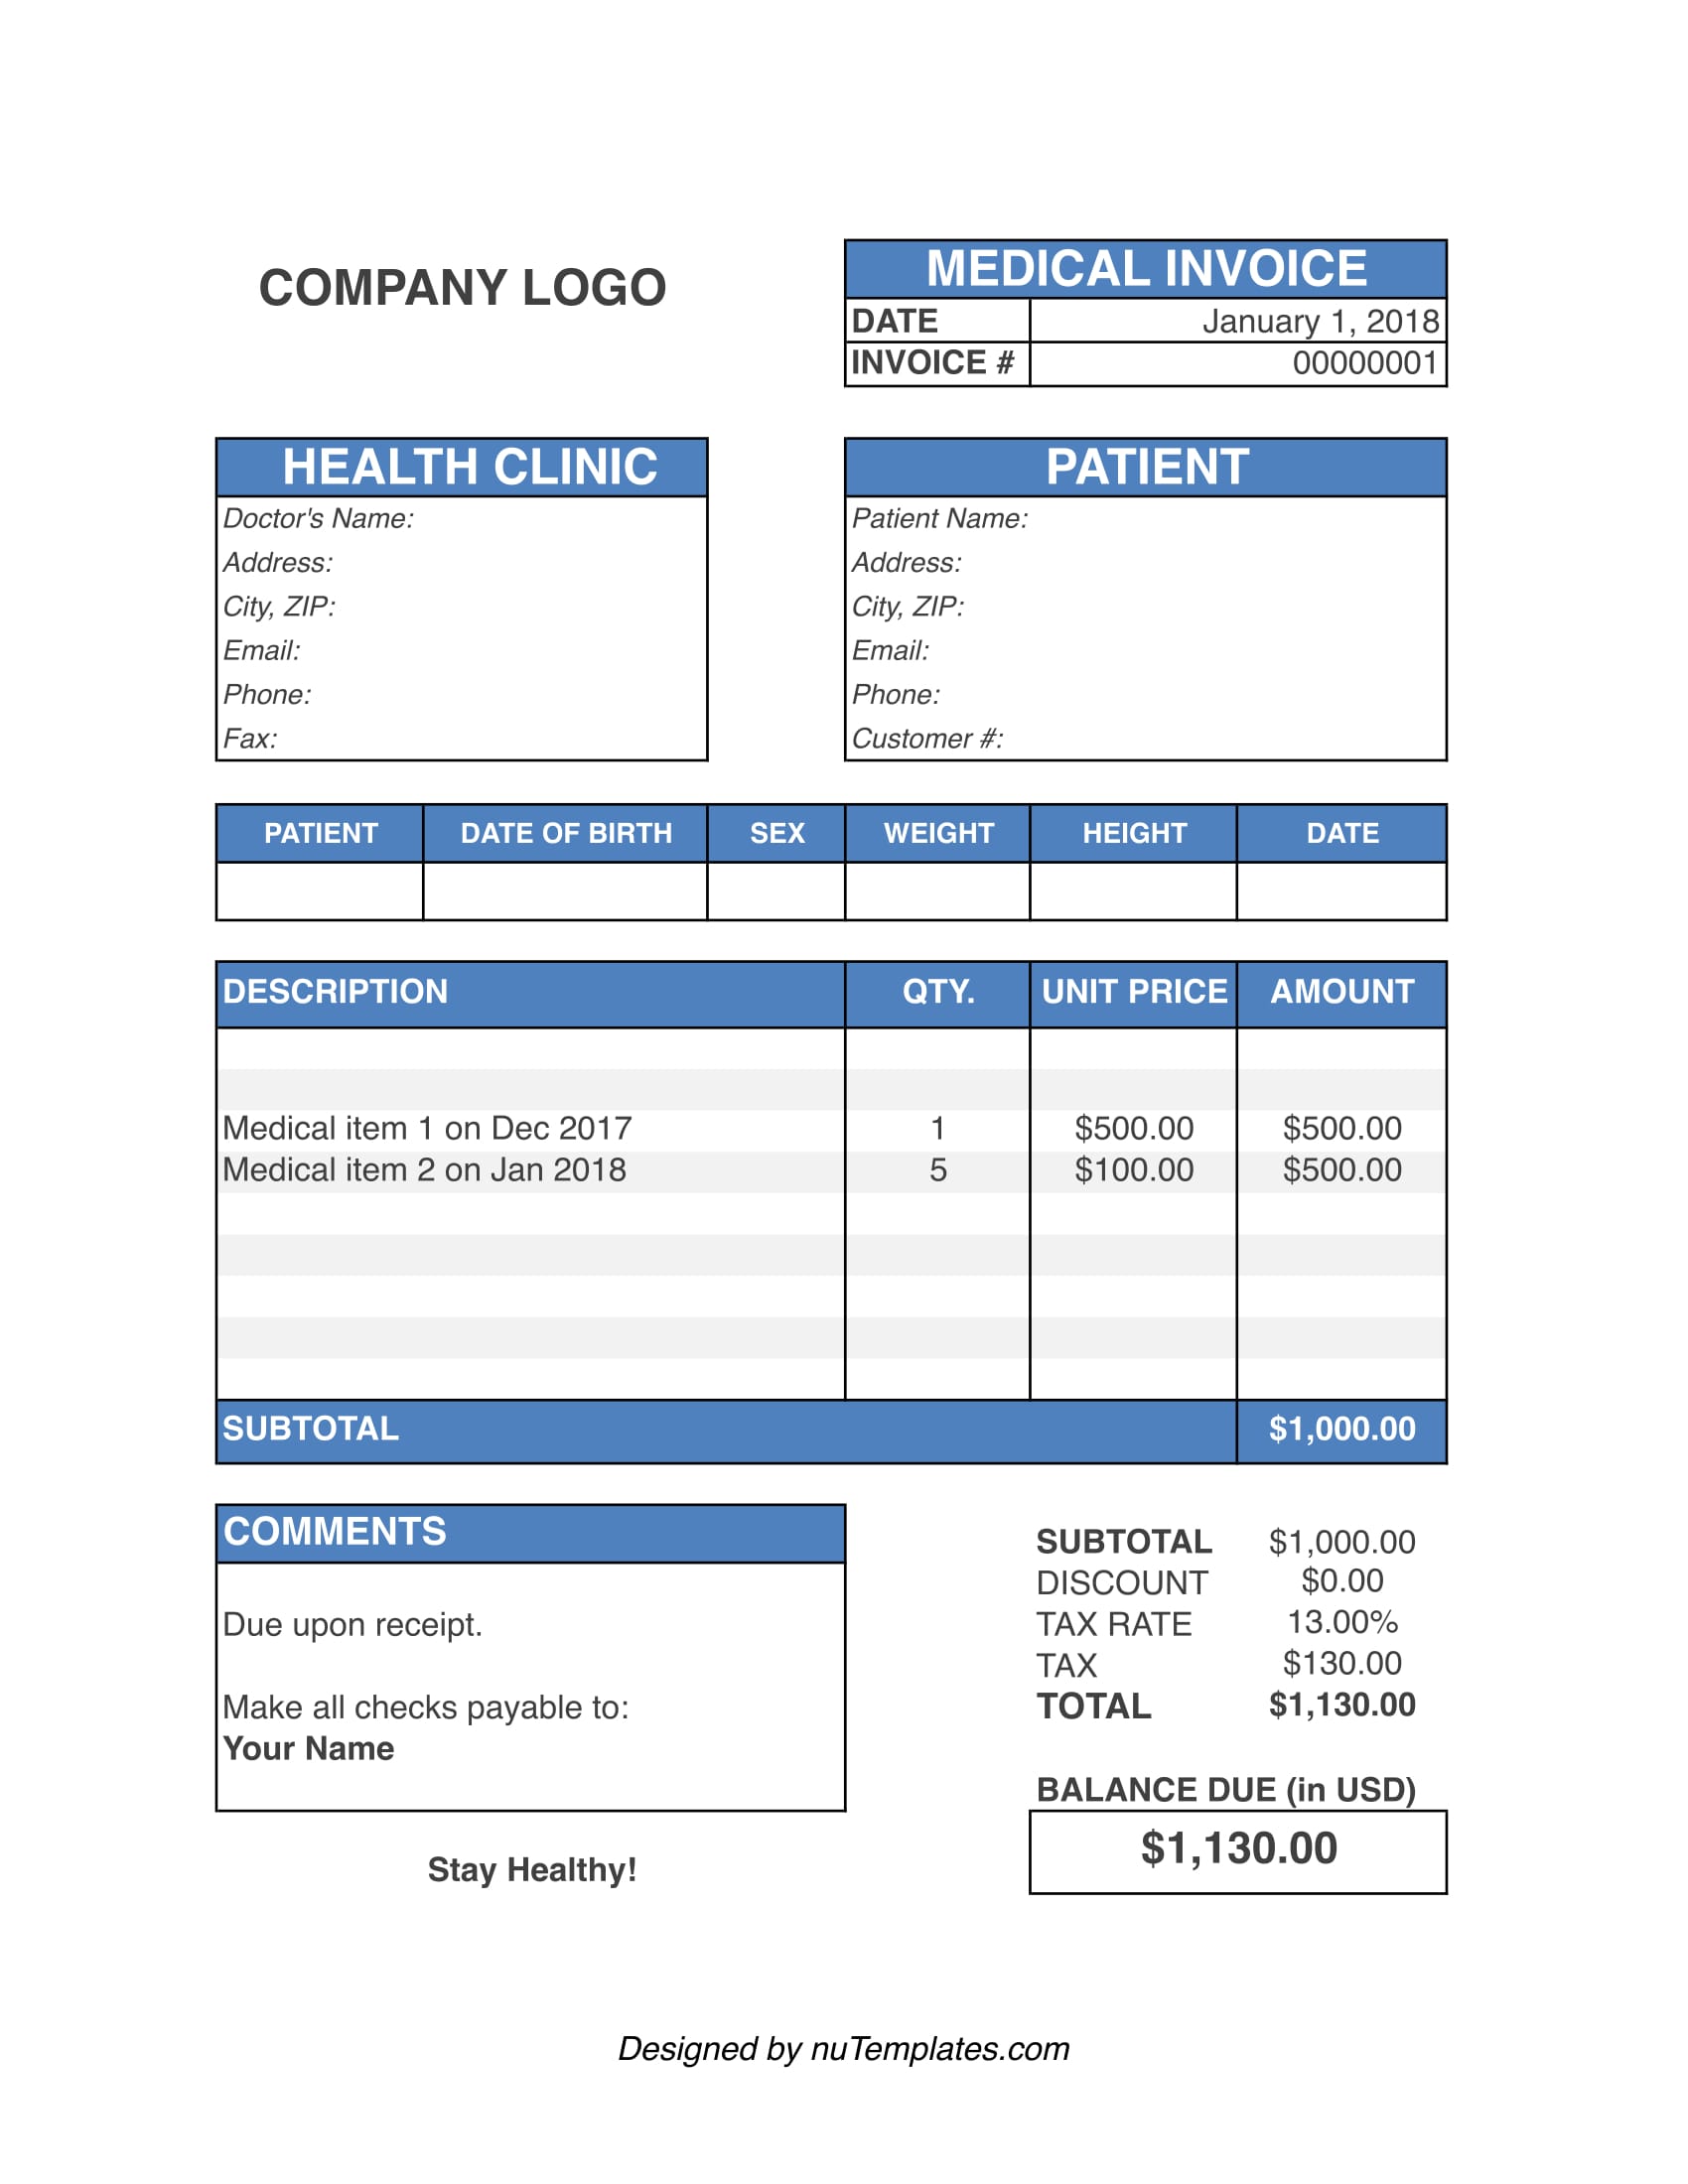 Medical Invoice Template Medical Invoices nuTemplates